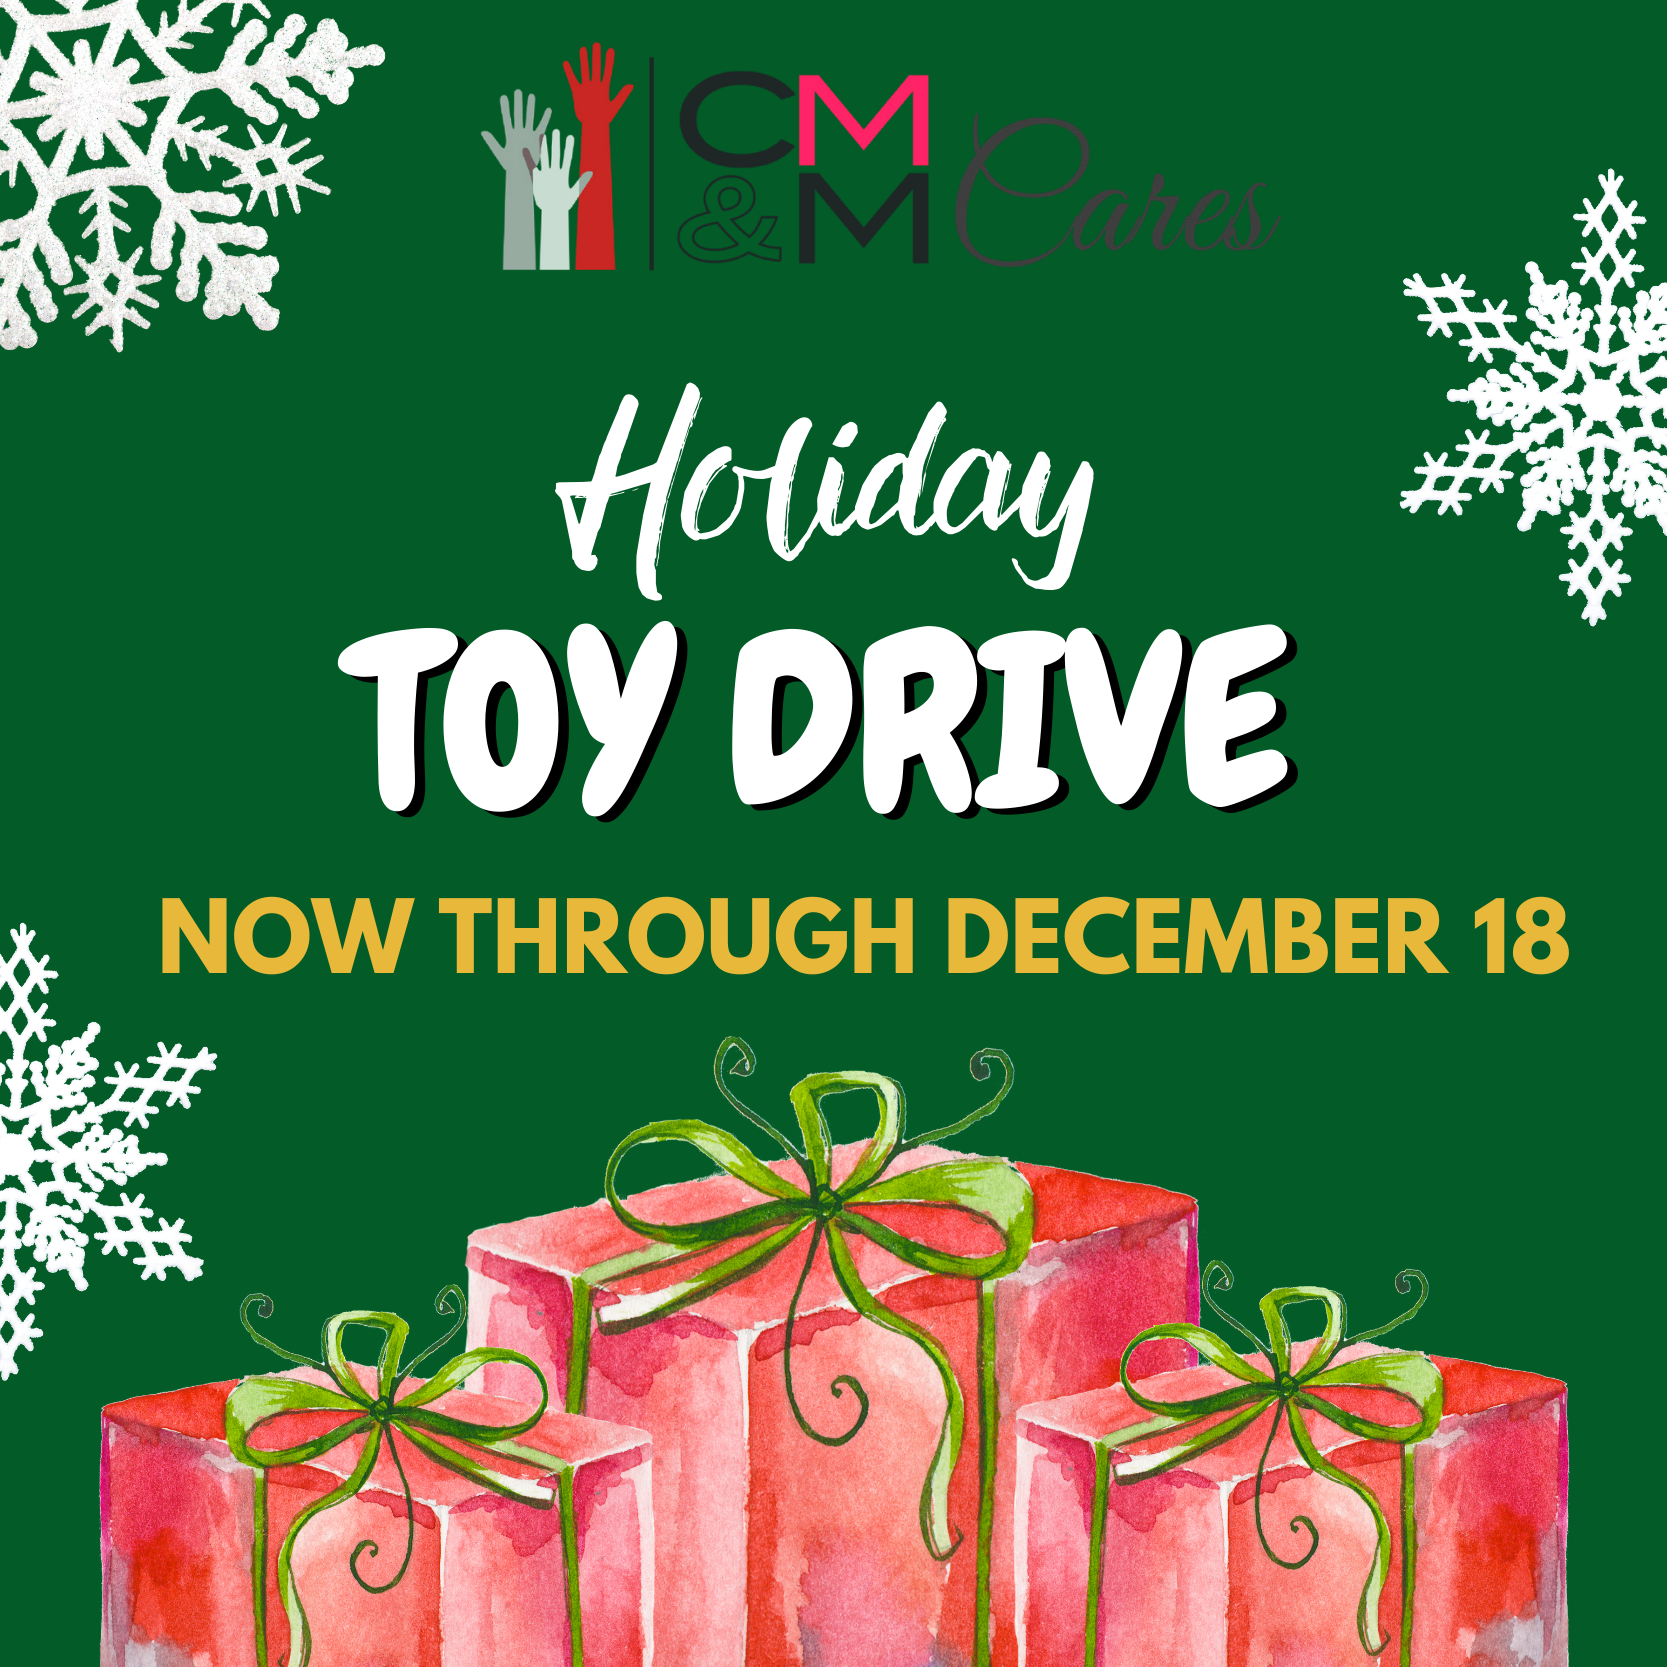 CMM Cares Holiday Toy Drive 2020